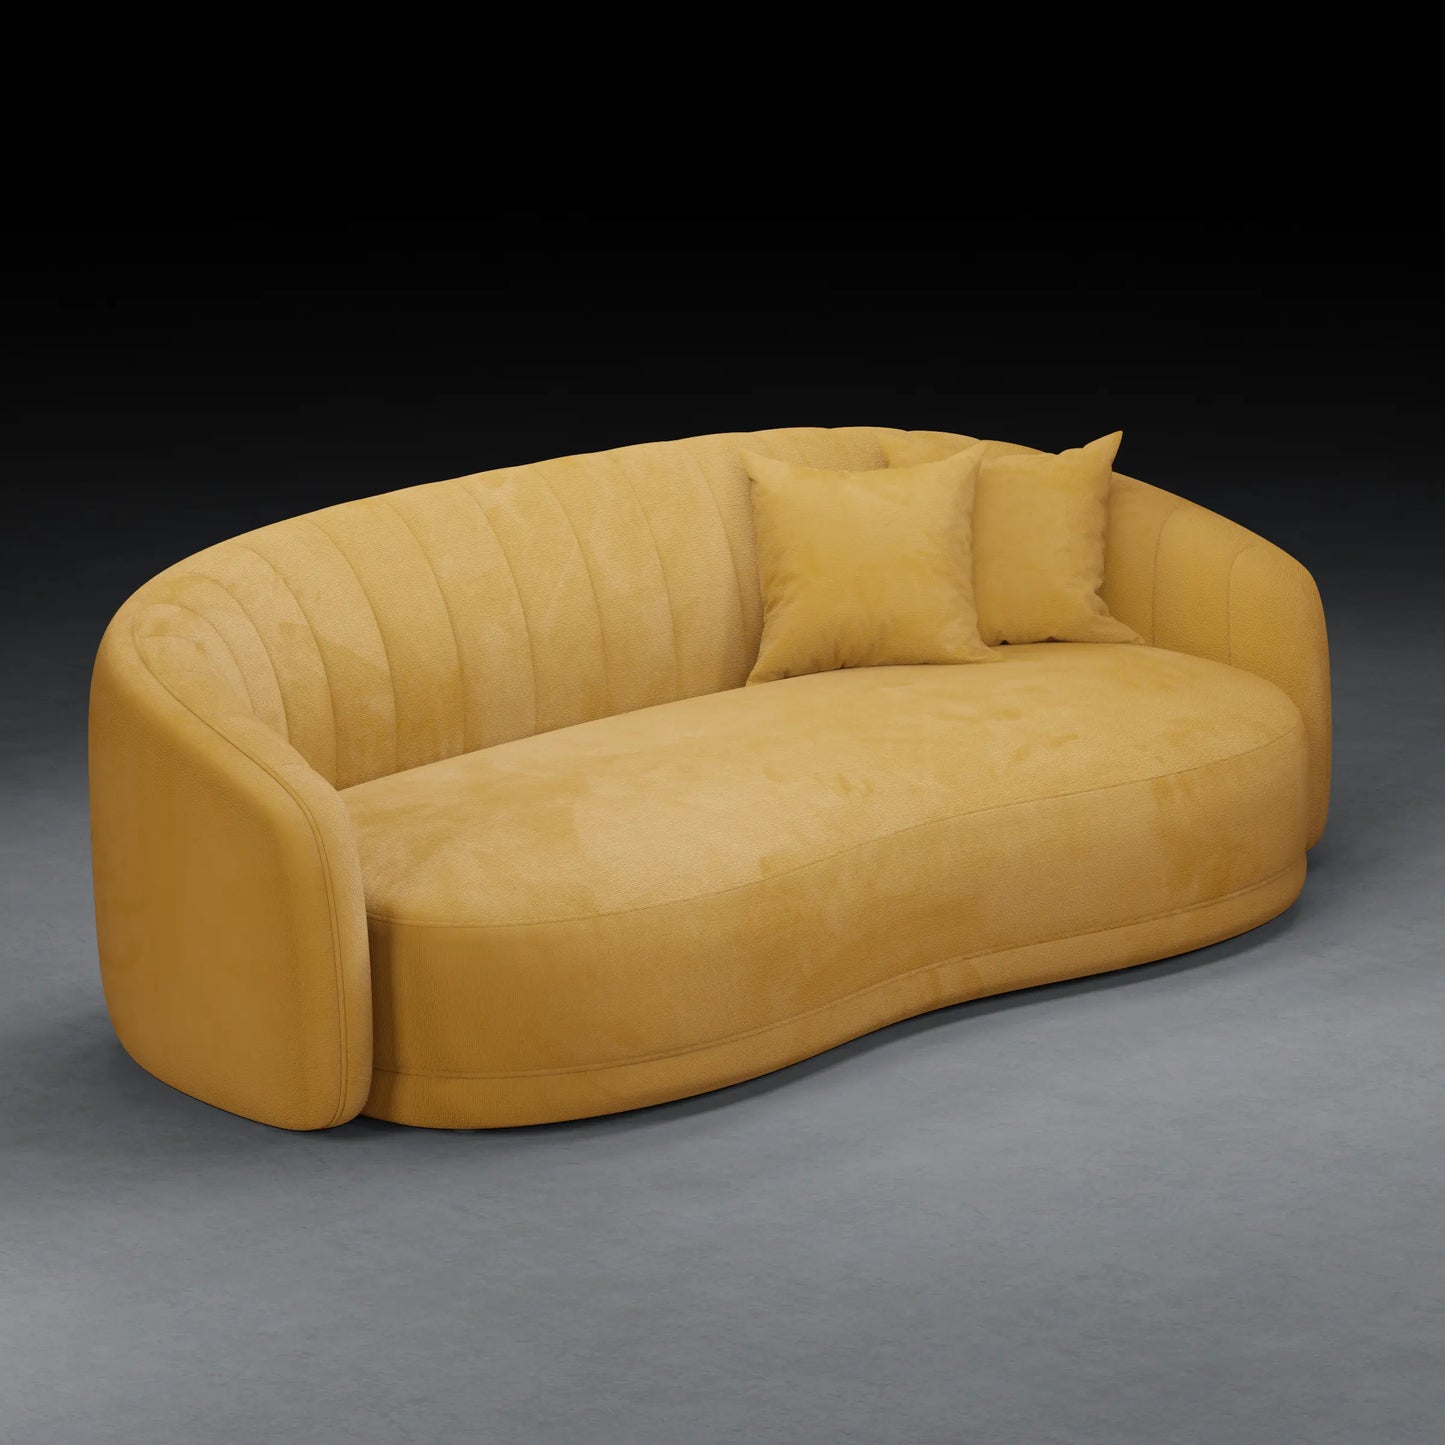 LILY - 3 Seater Couch in Linen Finish | Yellow Color